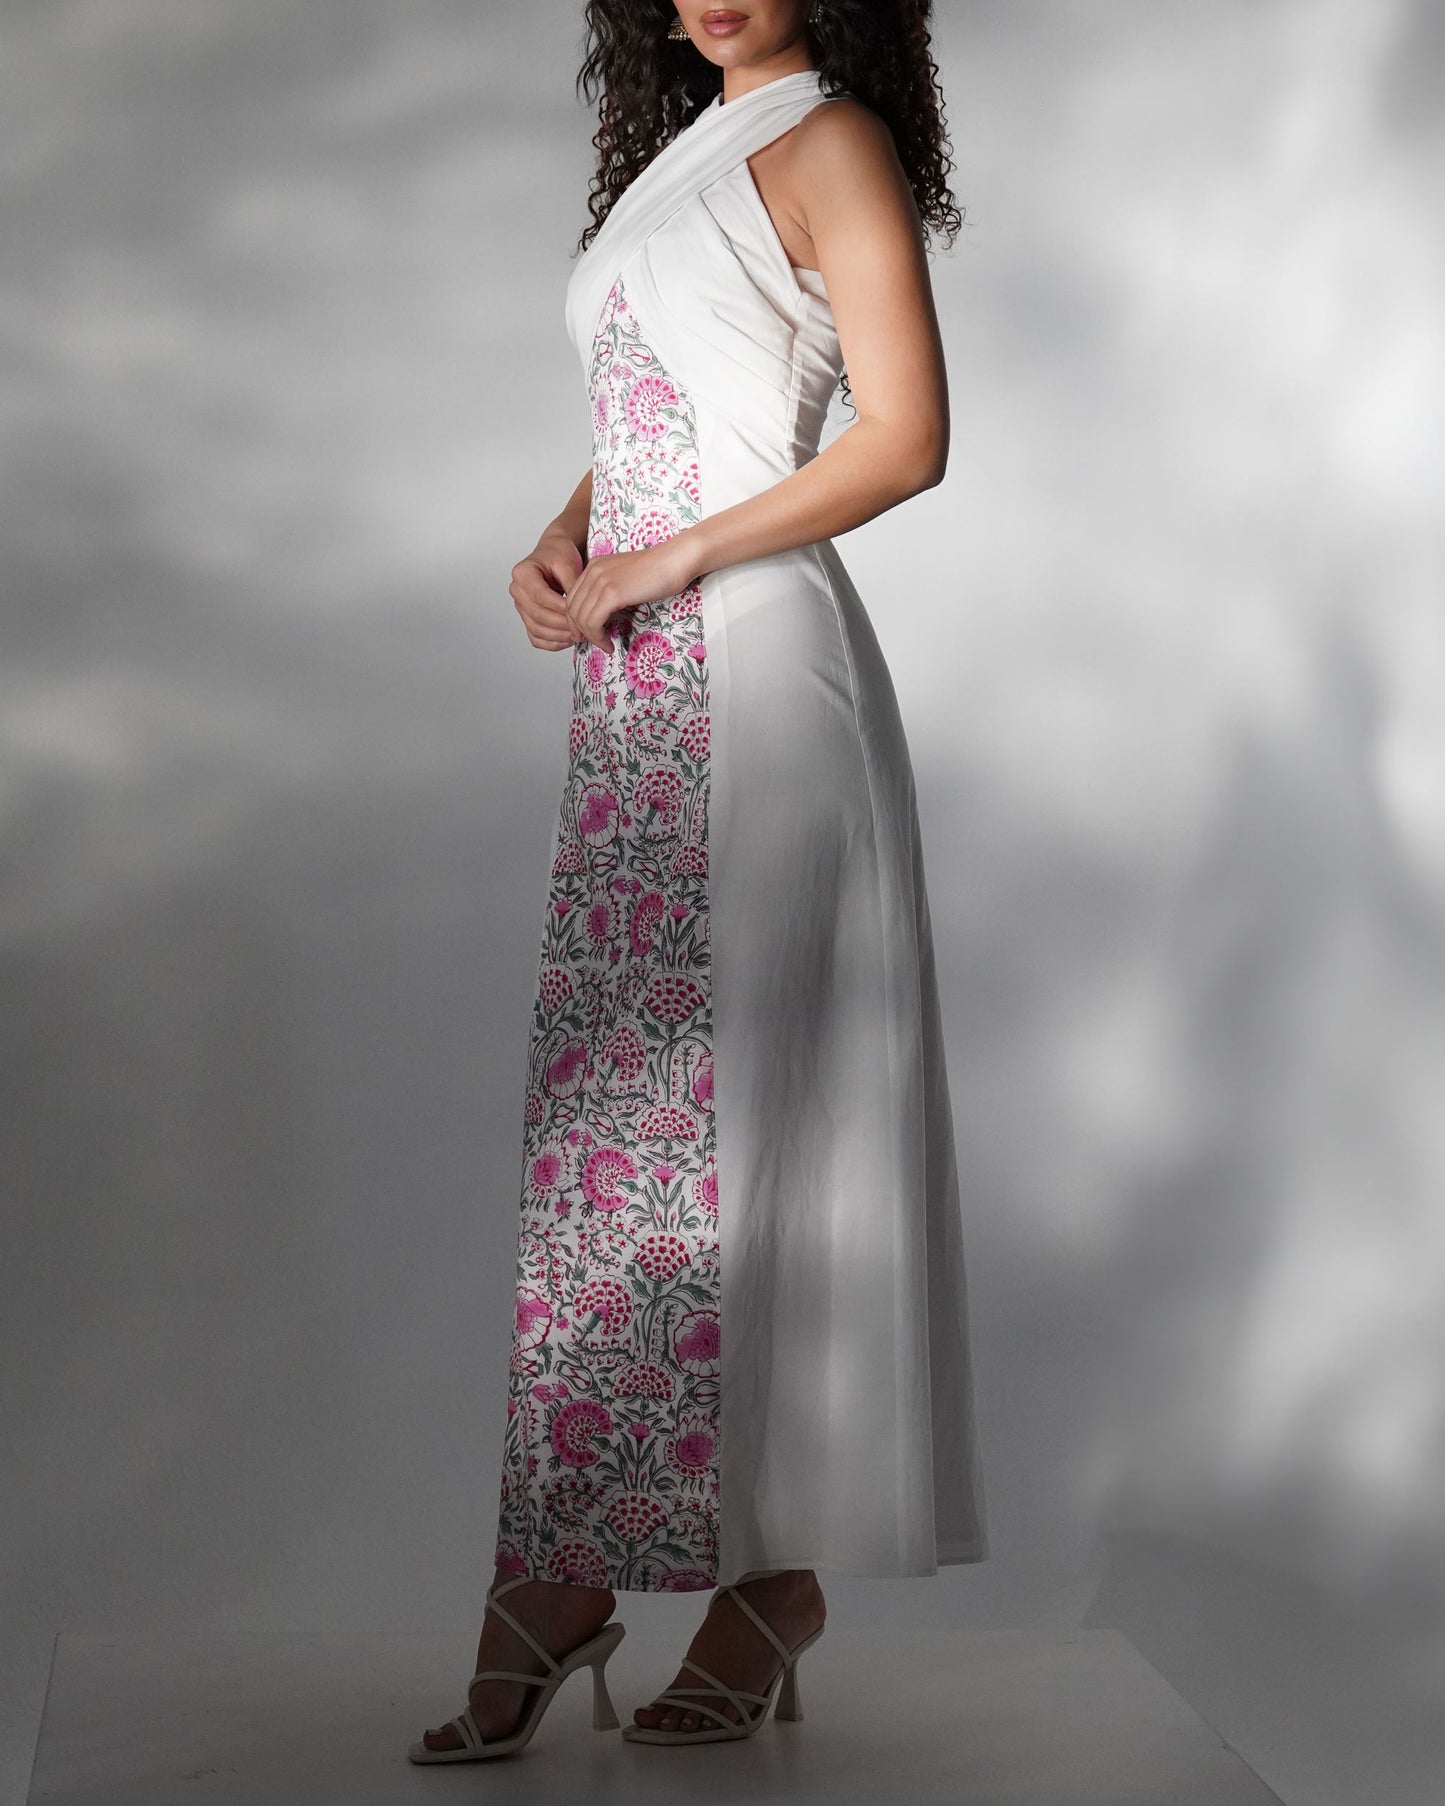 Garden romance pink floral maxi dress topped with longline jacket